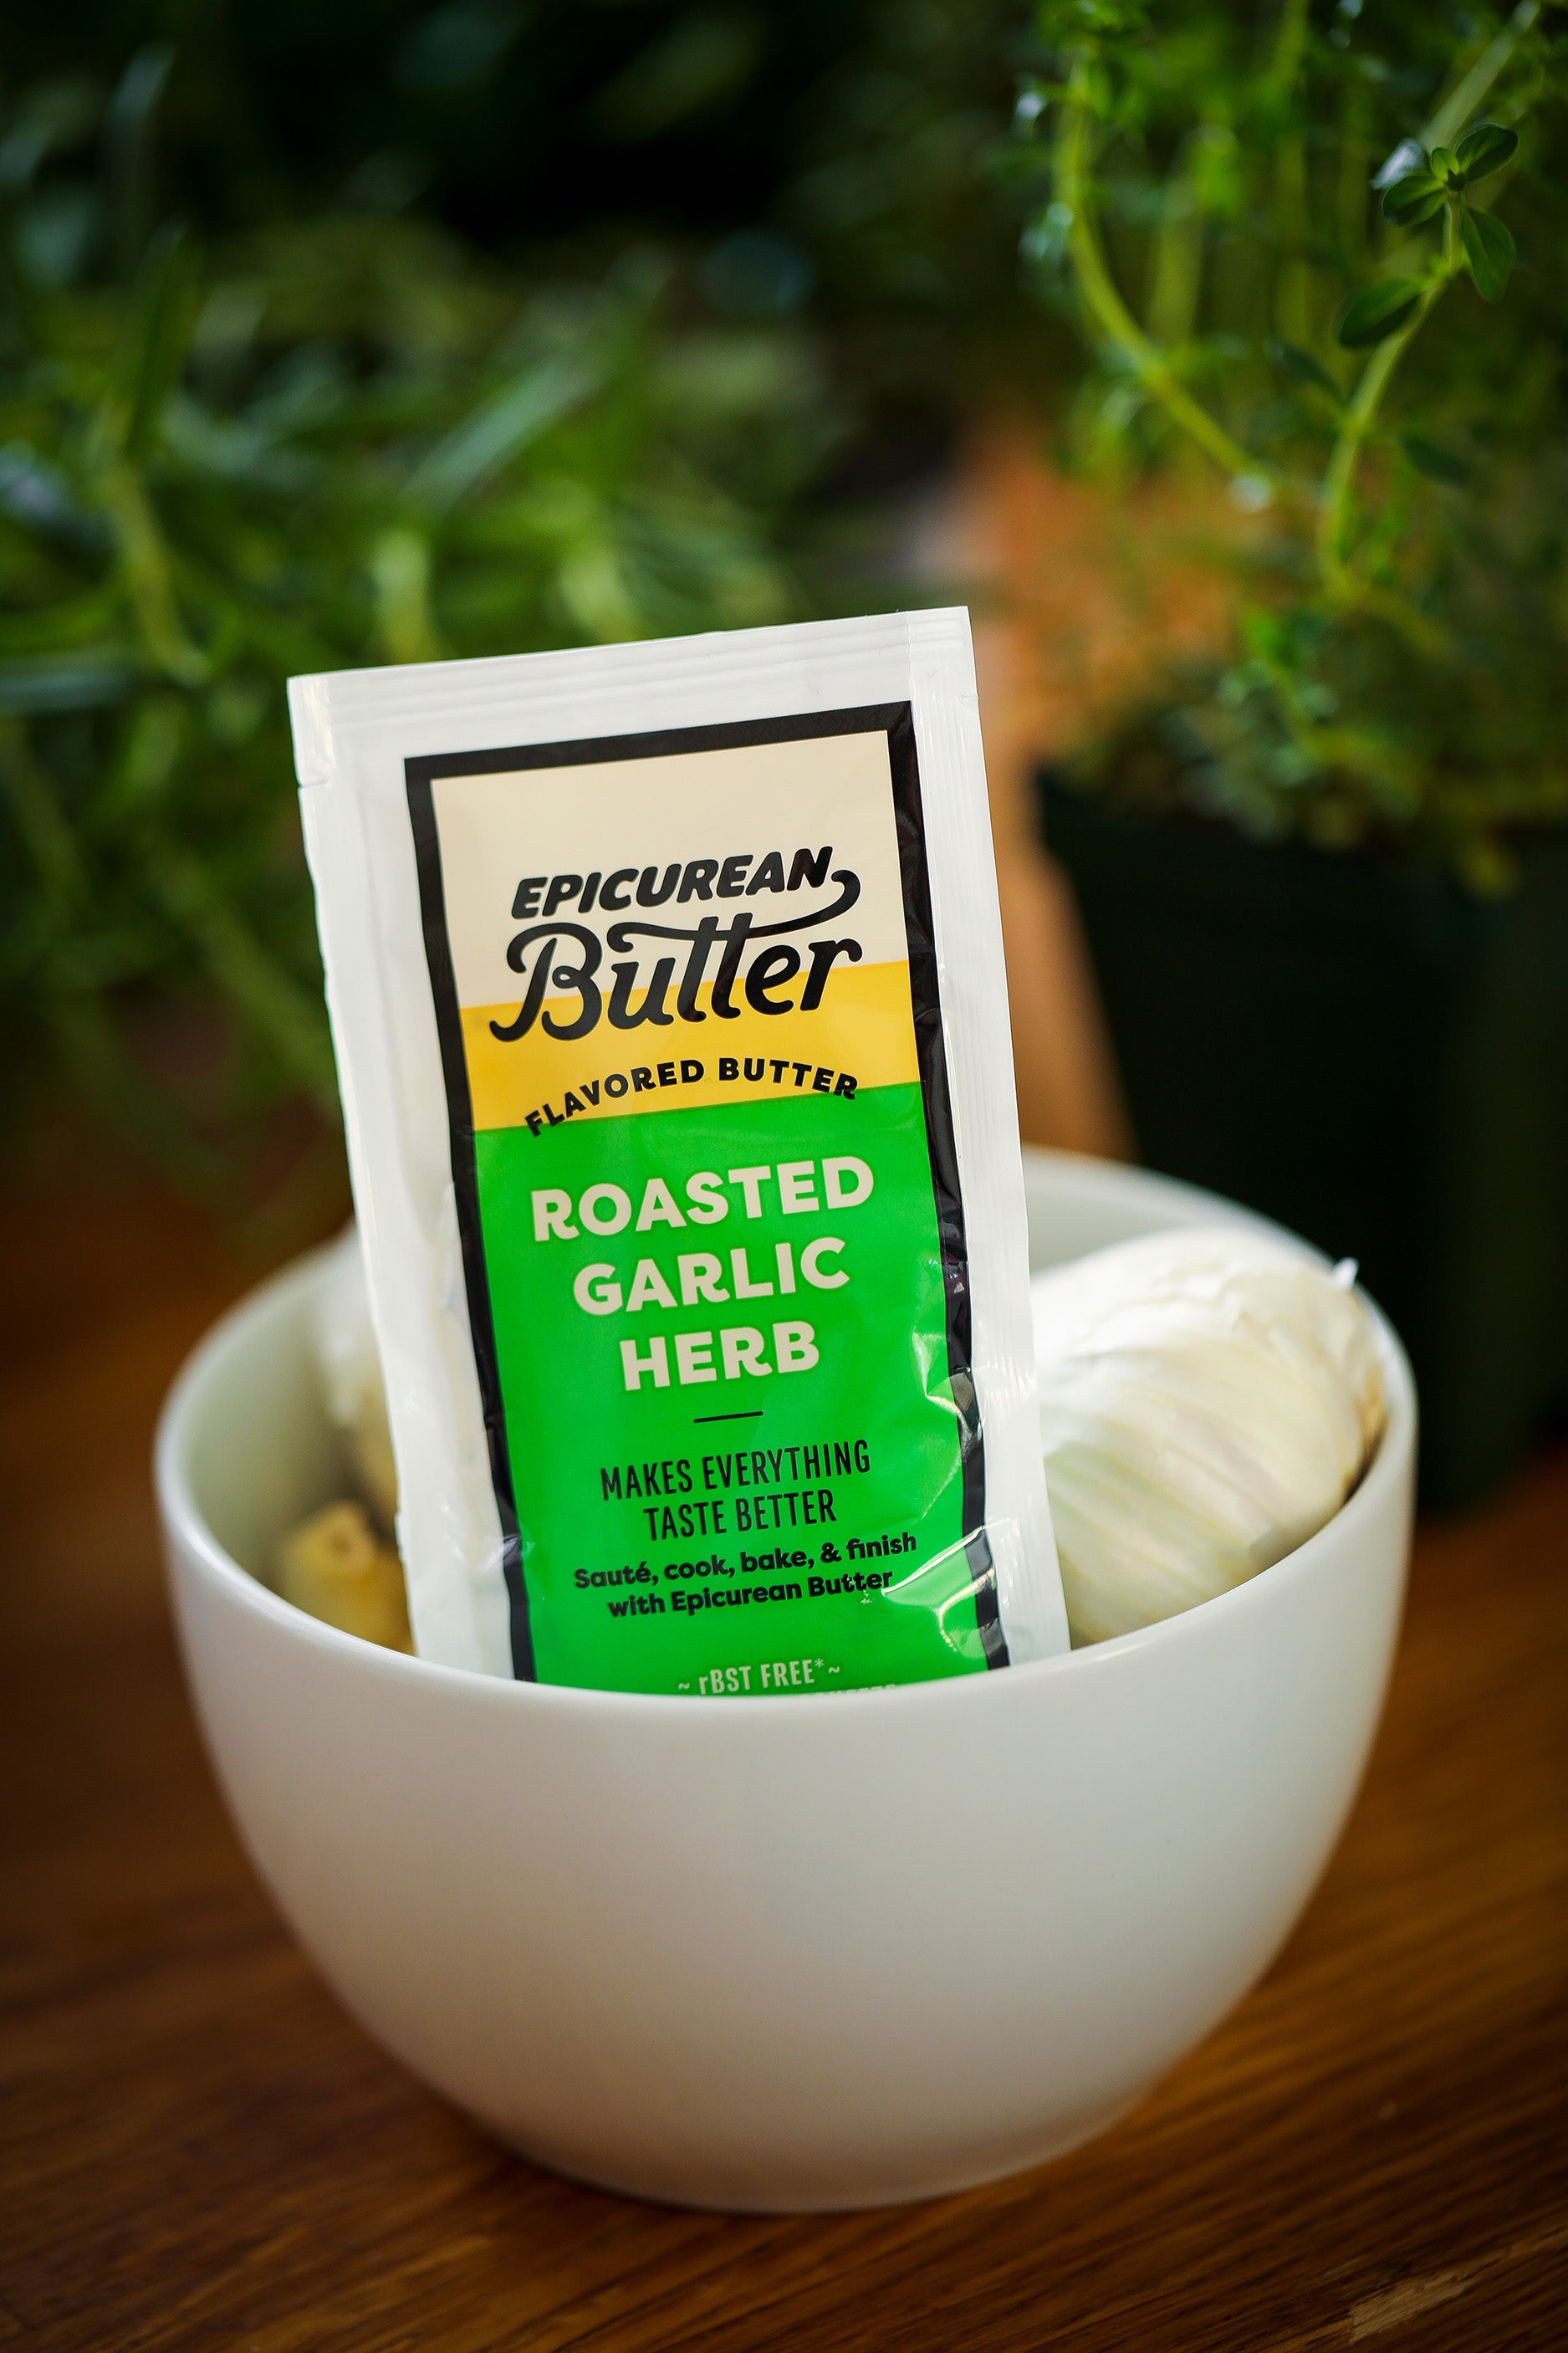 Epicurean Butter Roasted Garlic Herb 1oz squeeze packet